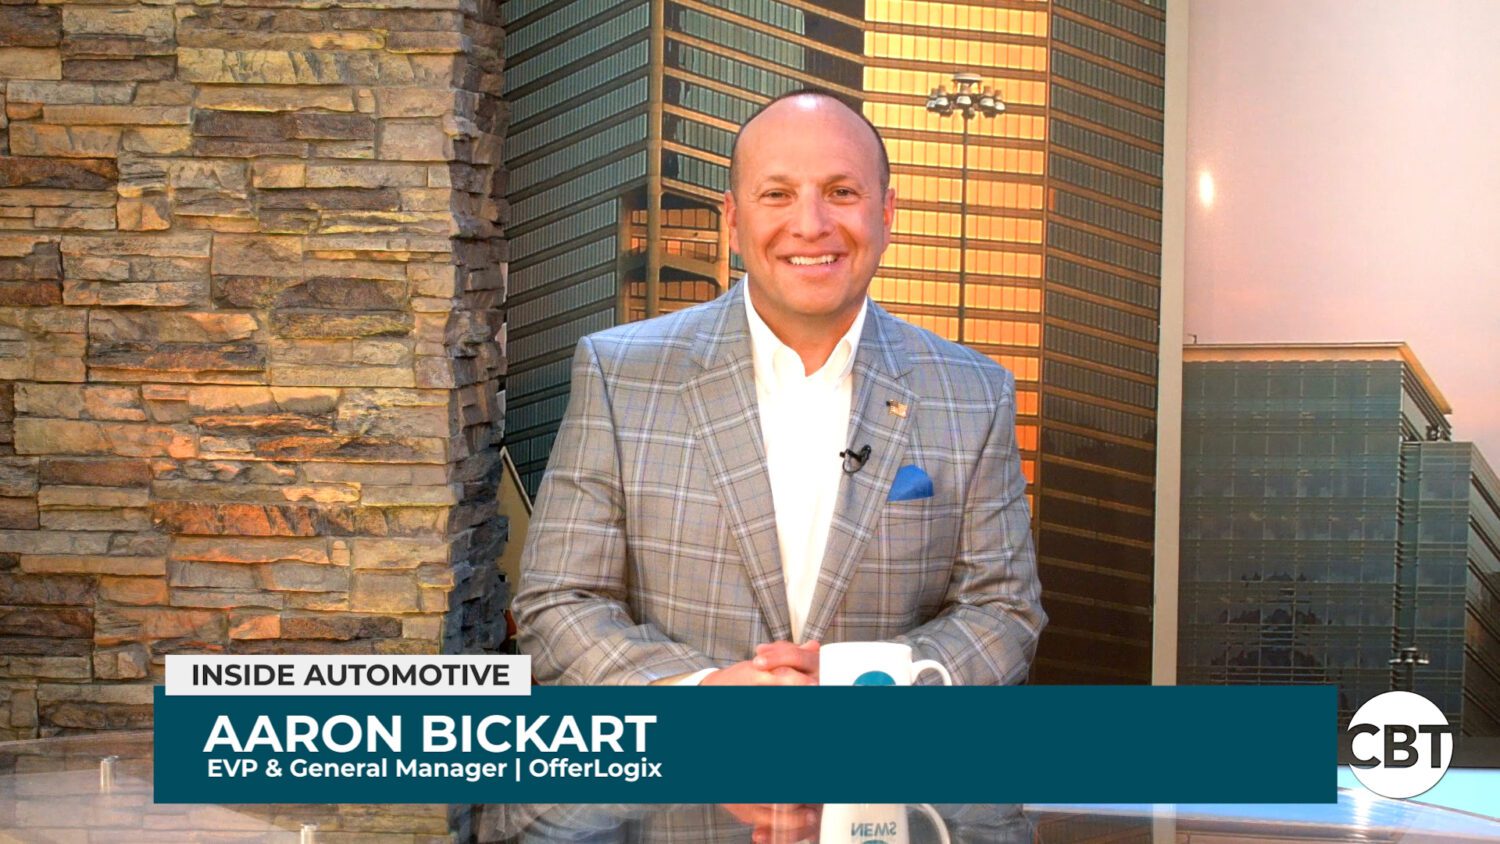 Aaron Bickart joins Inside Automotive to discuss how OfferLogix can help dealers understand electric vehicle loans.